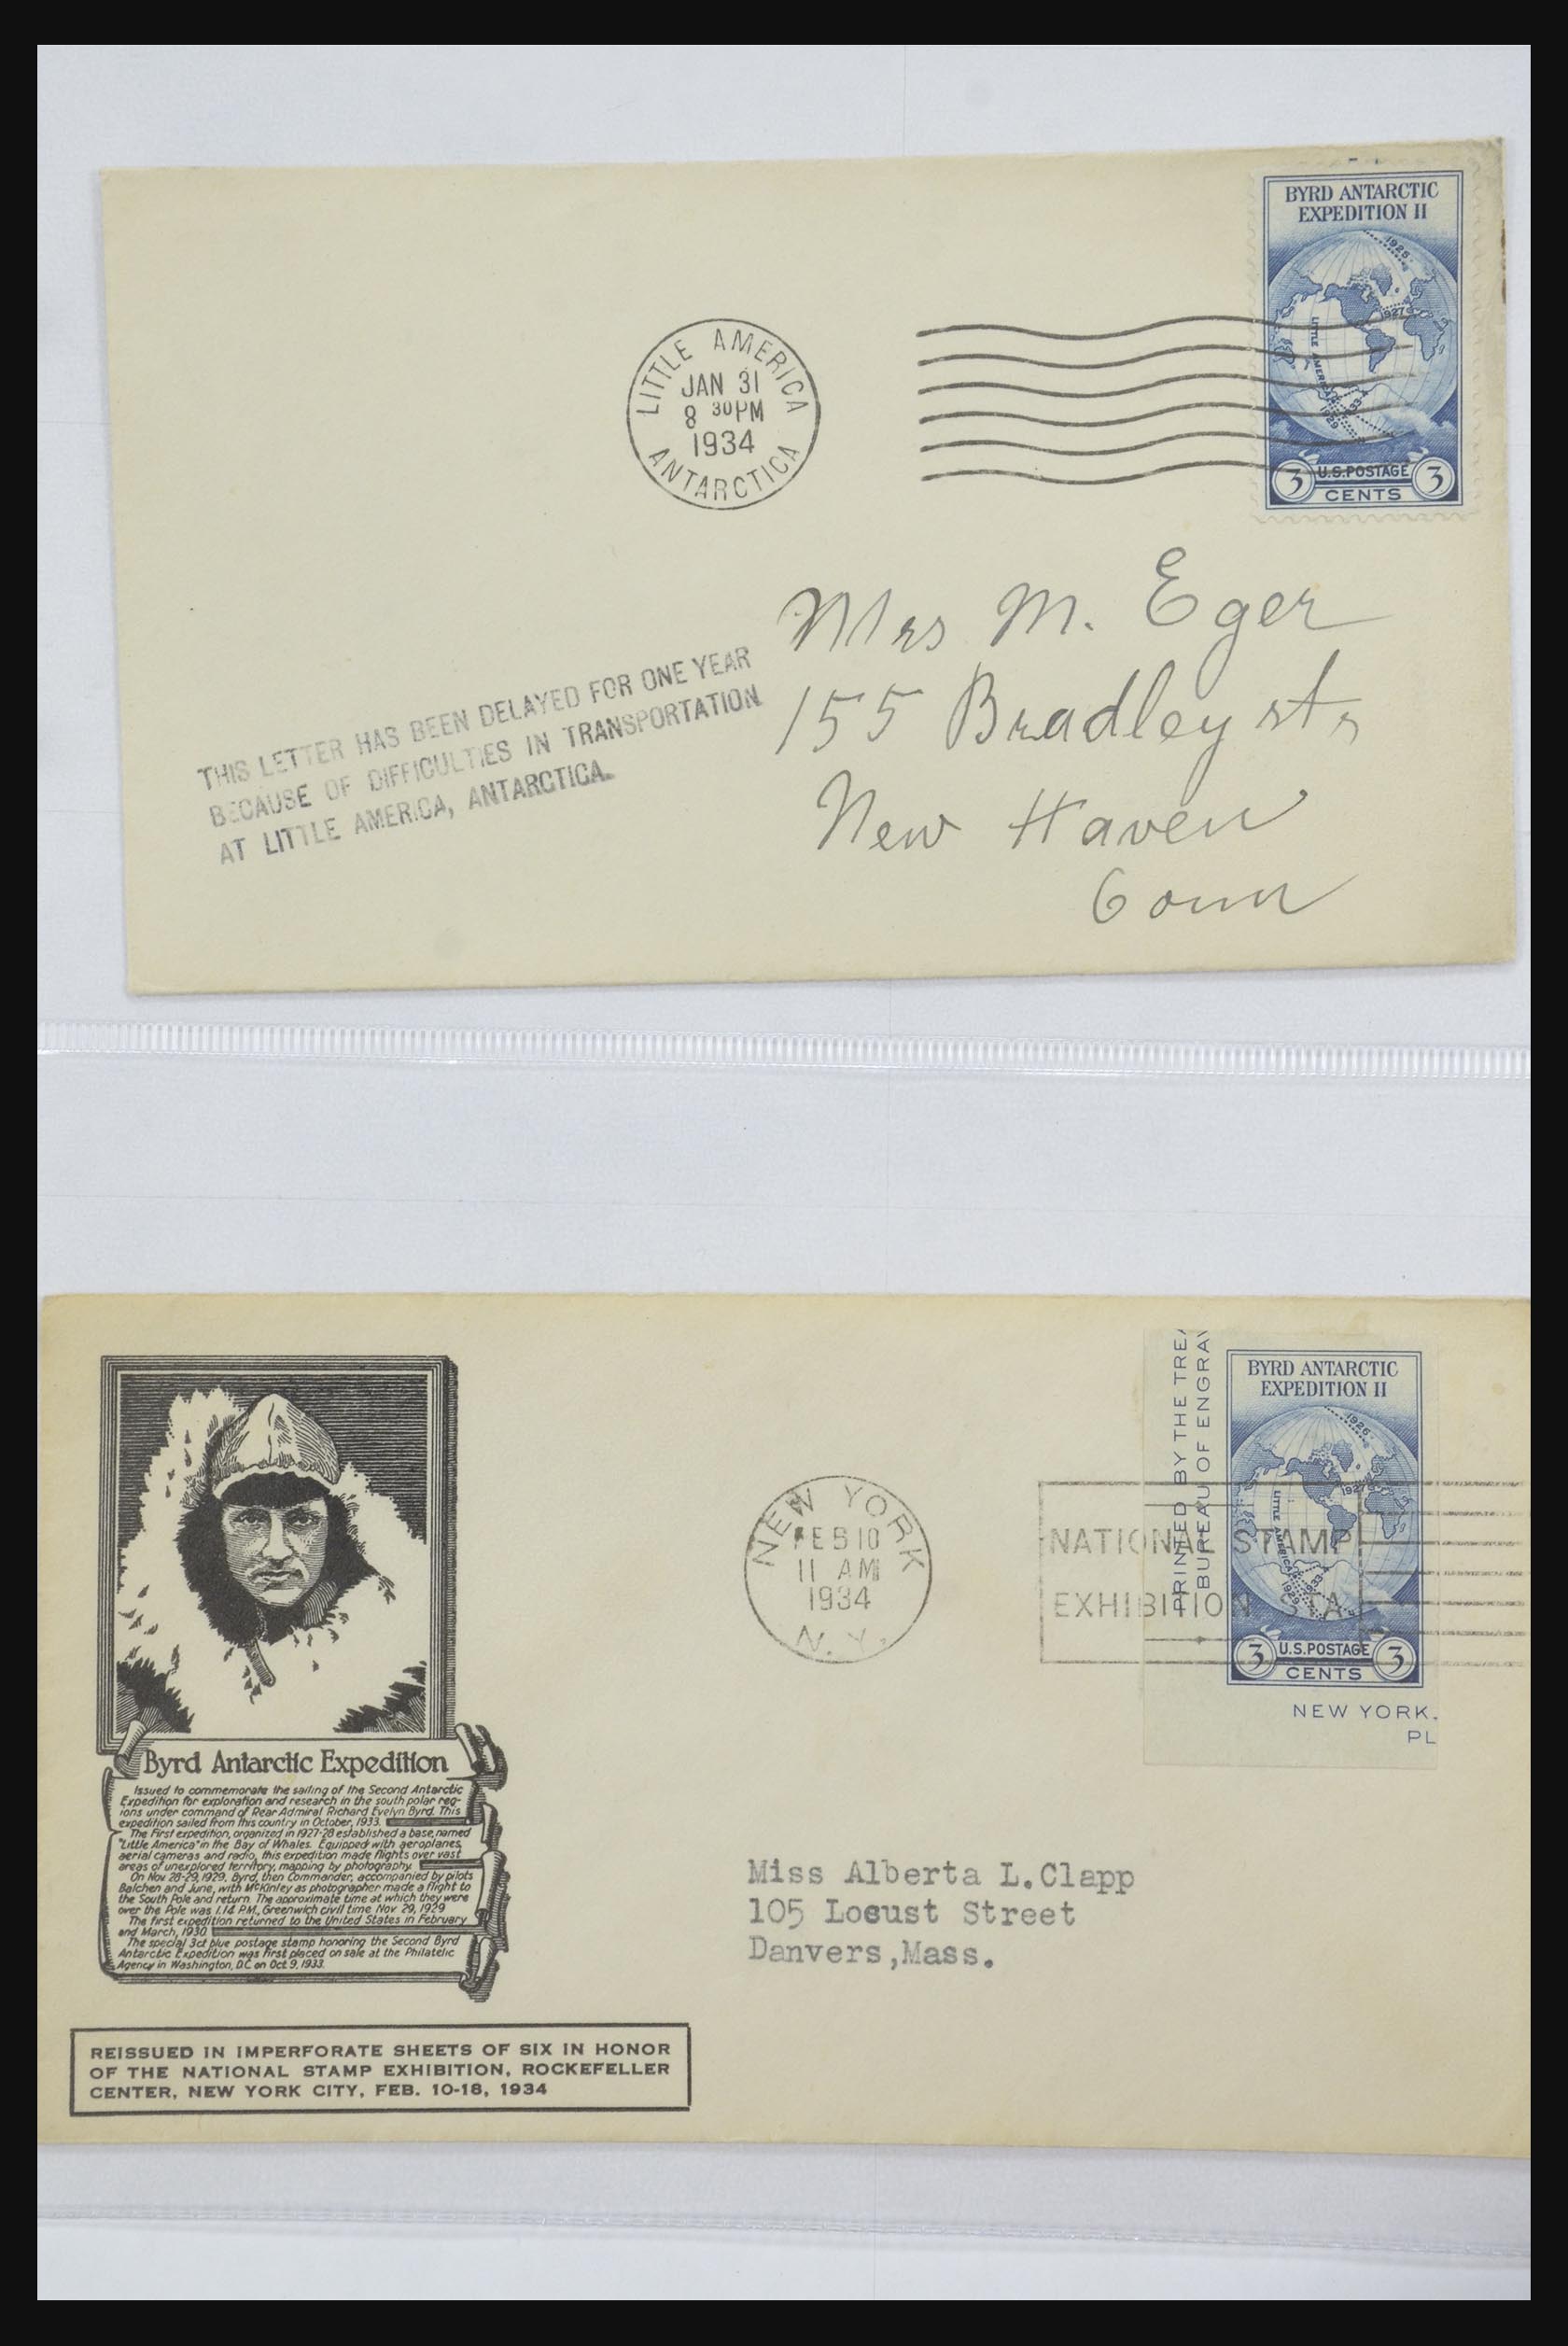 31627 033 - 31627 Byrd Antarctic Expedition 1934.